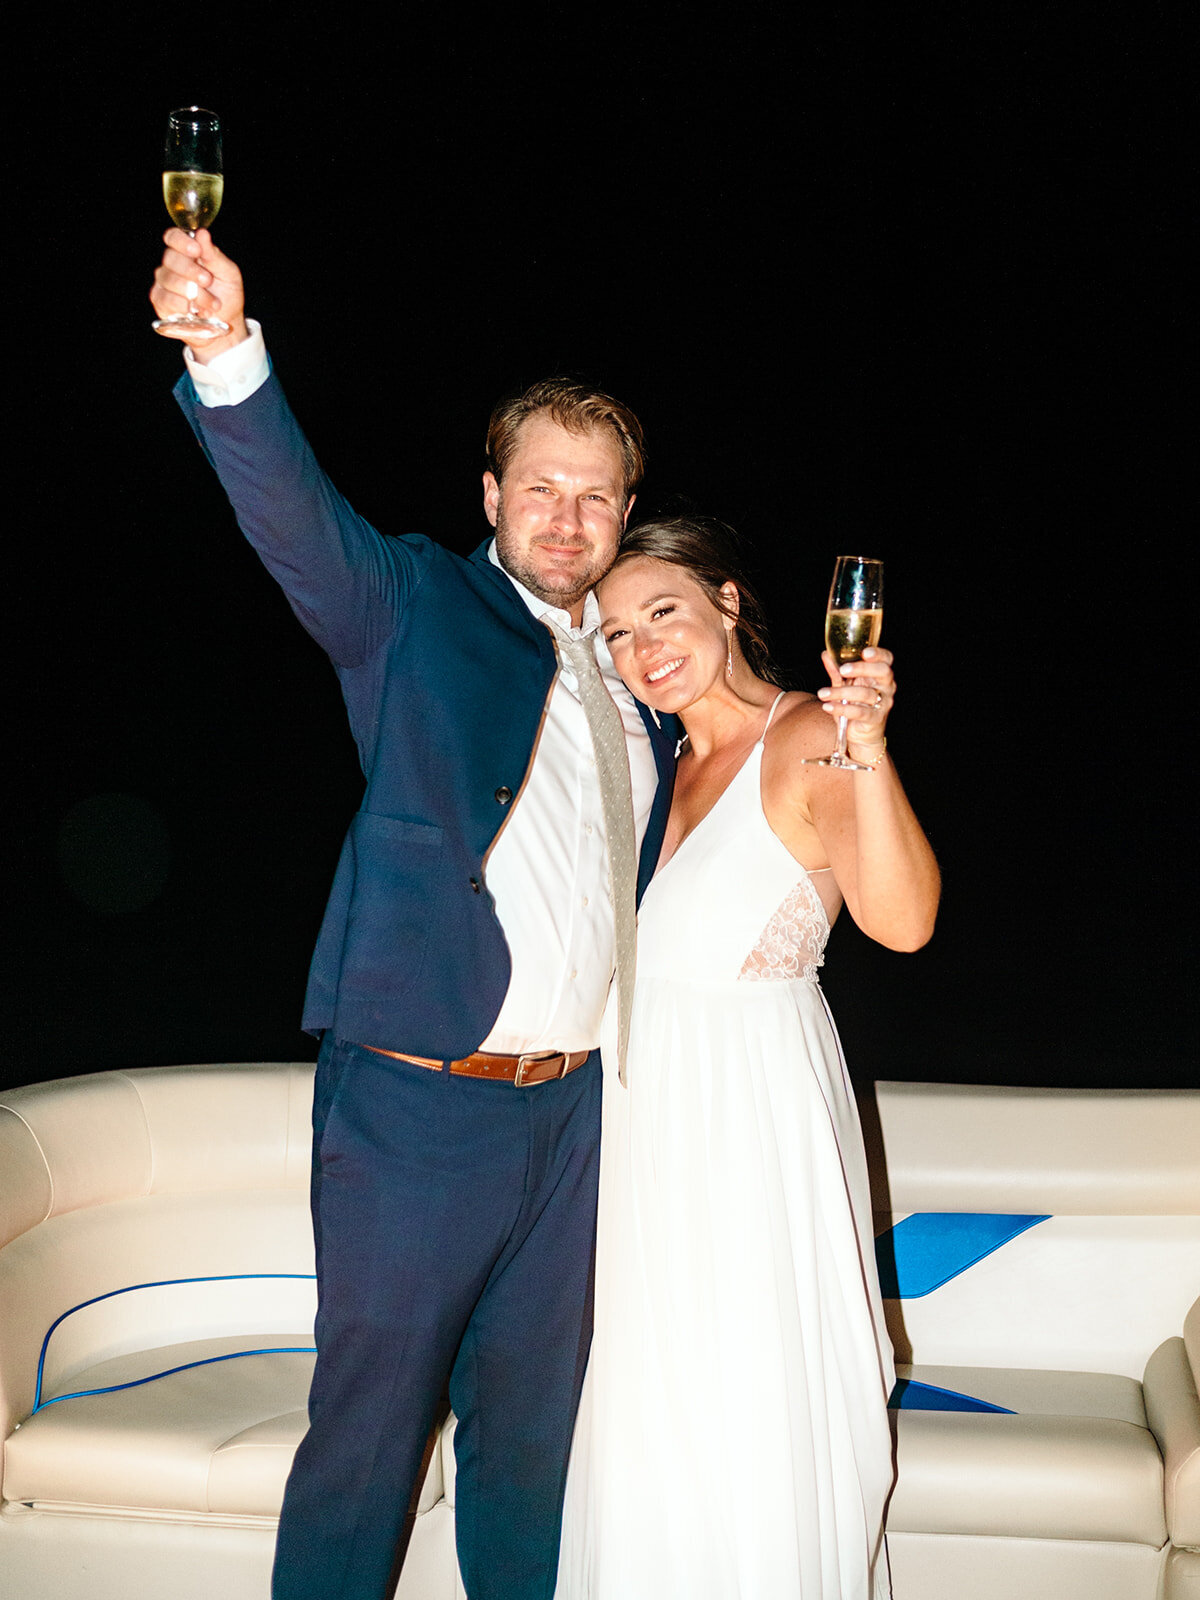 Hilton Head Island Wedding  | Sea Pines Wedding  | Trish Beck Events | Southeast Wedding Planner |  Josh Morehouse Photography  |  Cocktail Hour Reception  Bride and Groom Boat Send Off